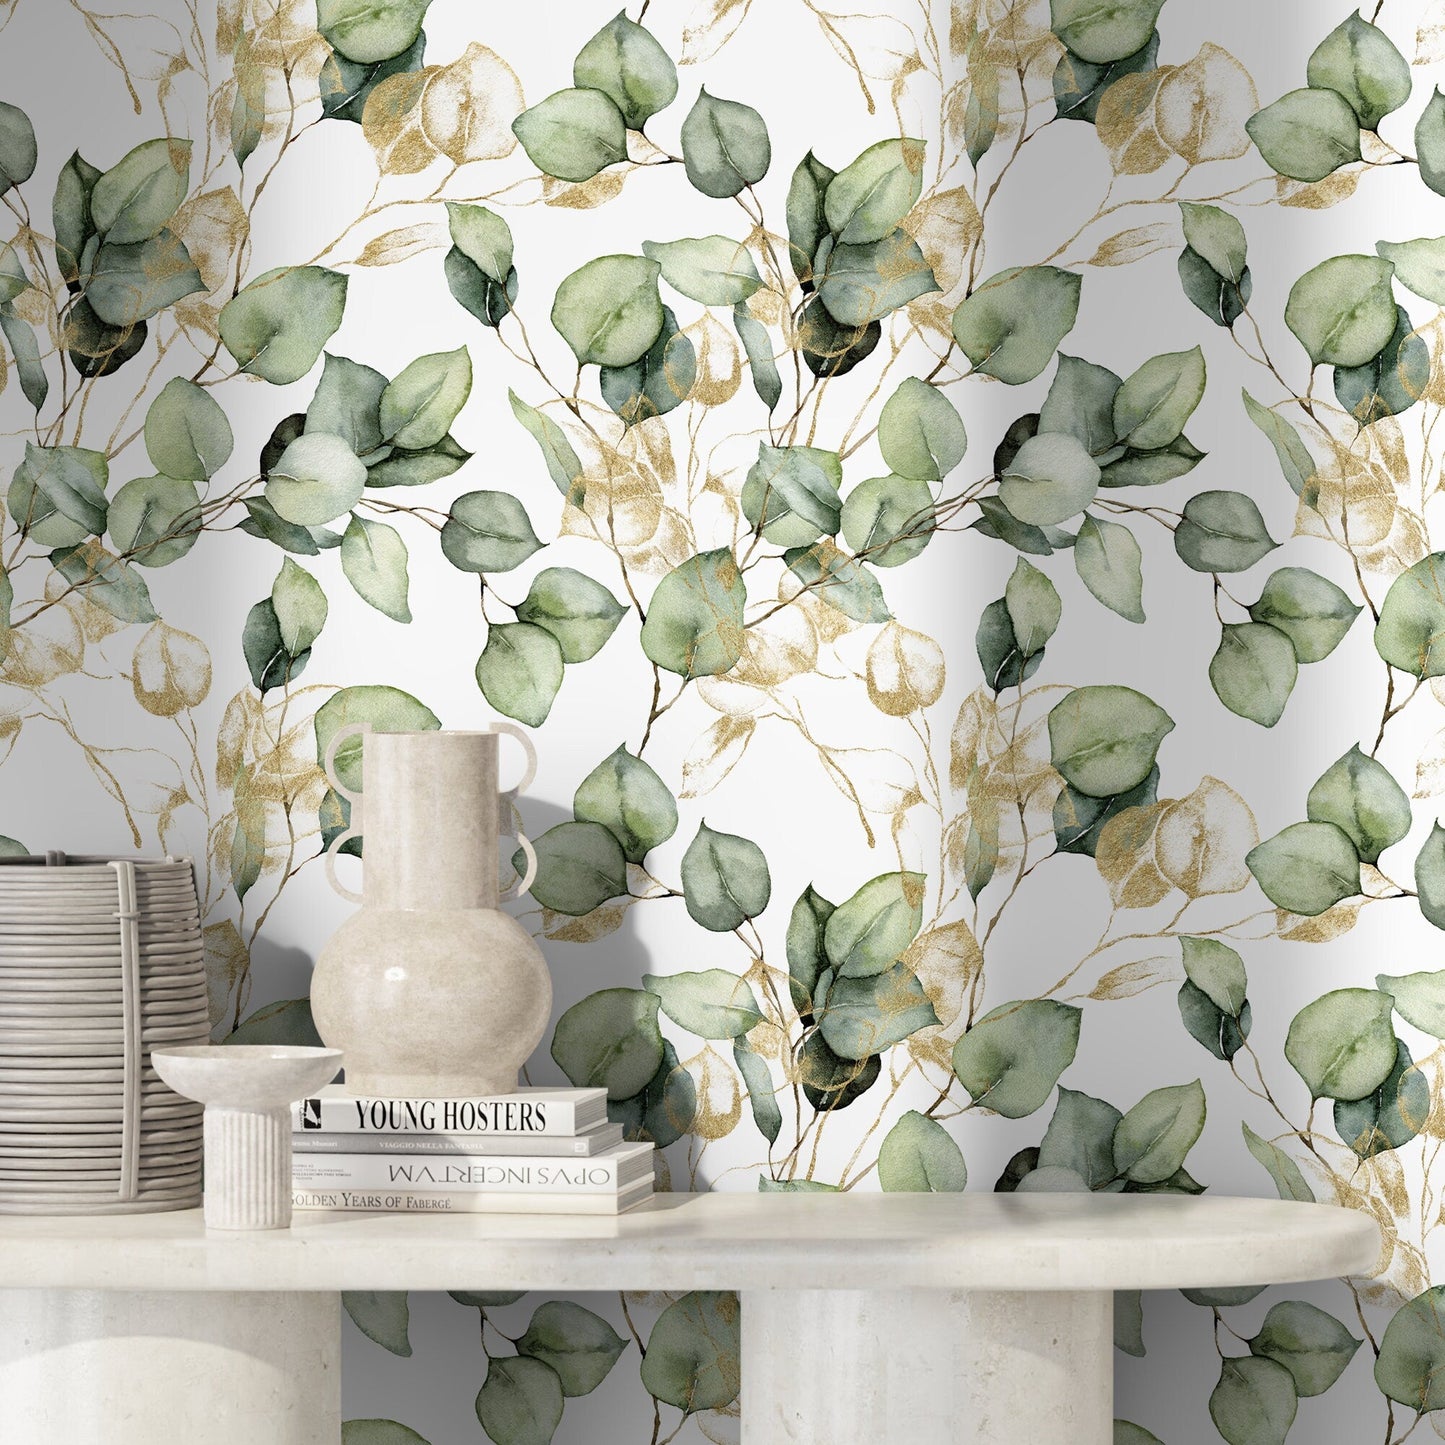 Wallpaper Peel and Stick Wallpaper Removable Wallpaper Home Decor Wall Art Wall Decor Room Decor / Green Leaves Wallpaper - C410